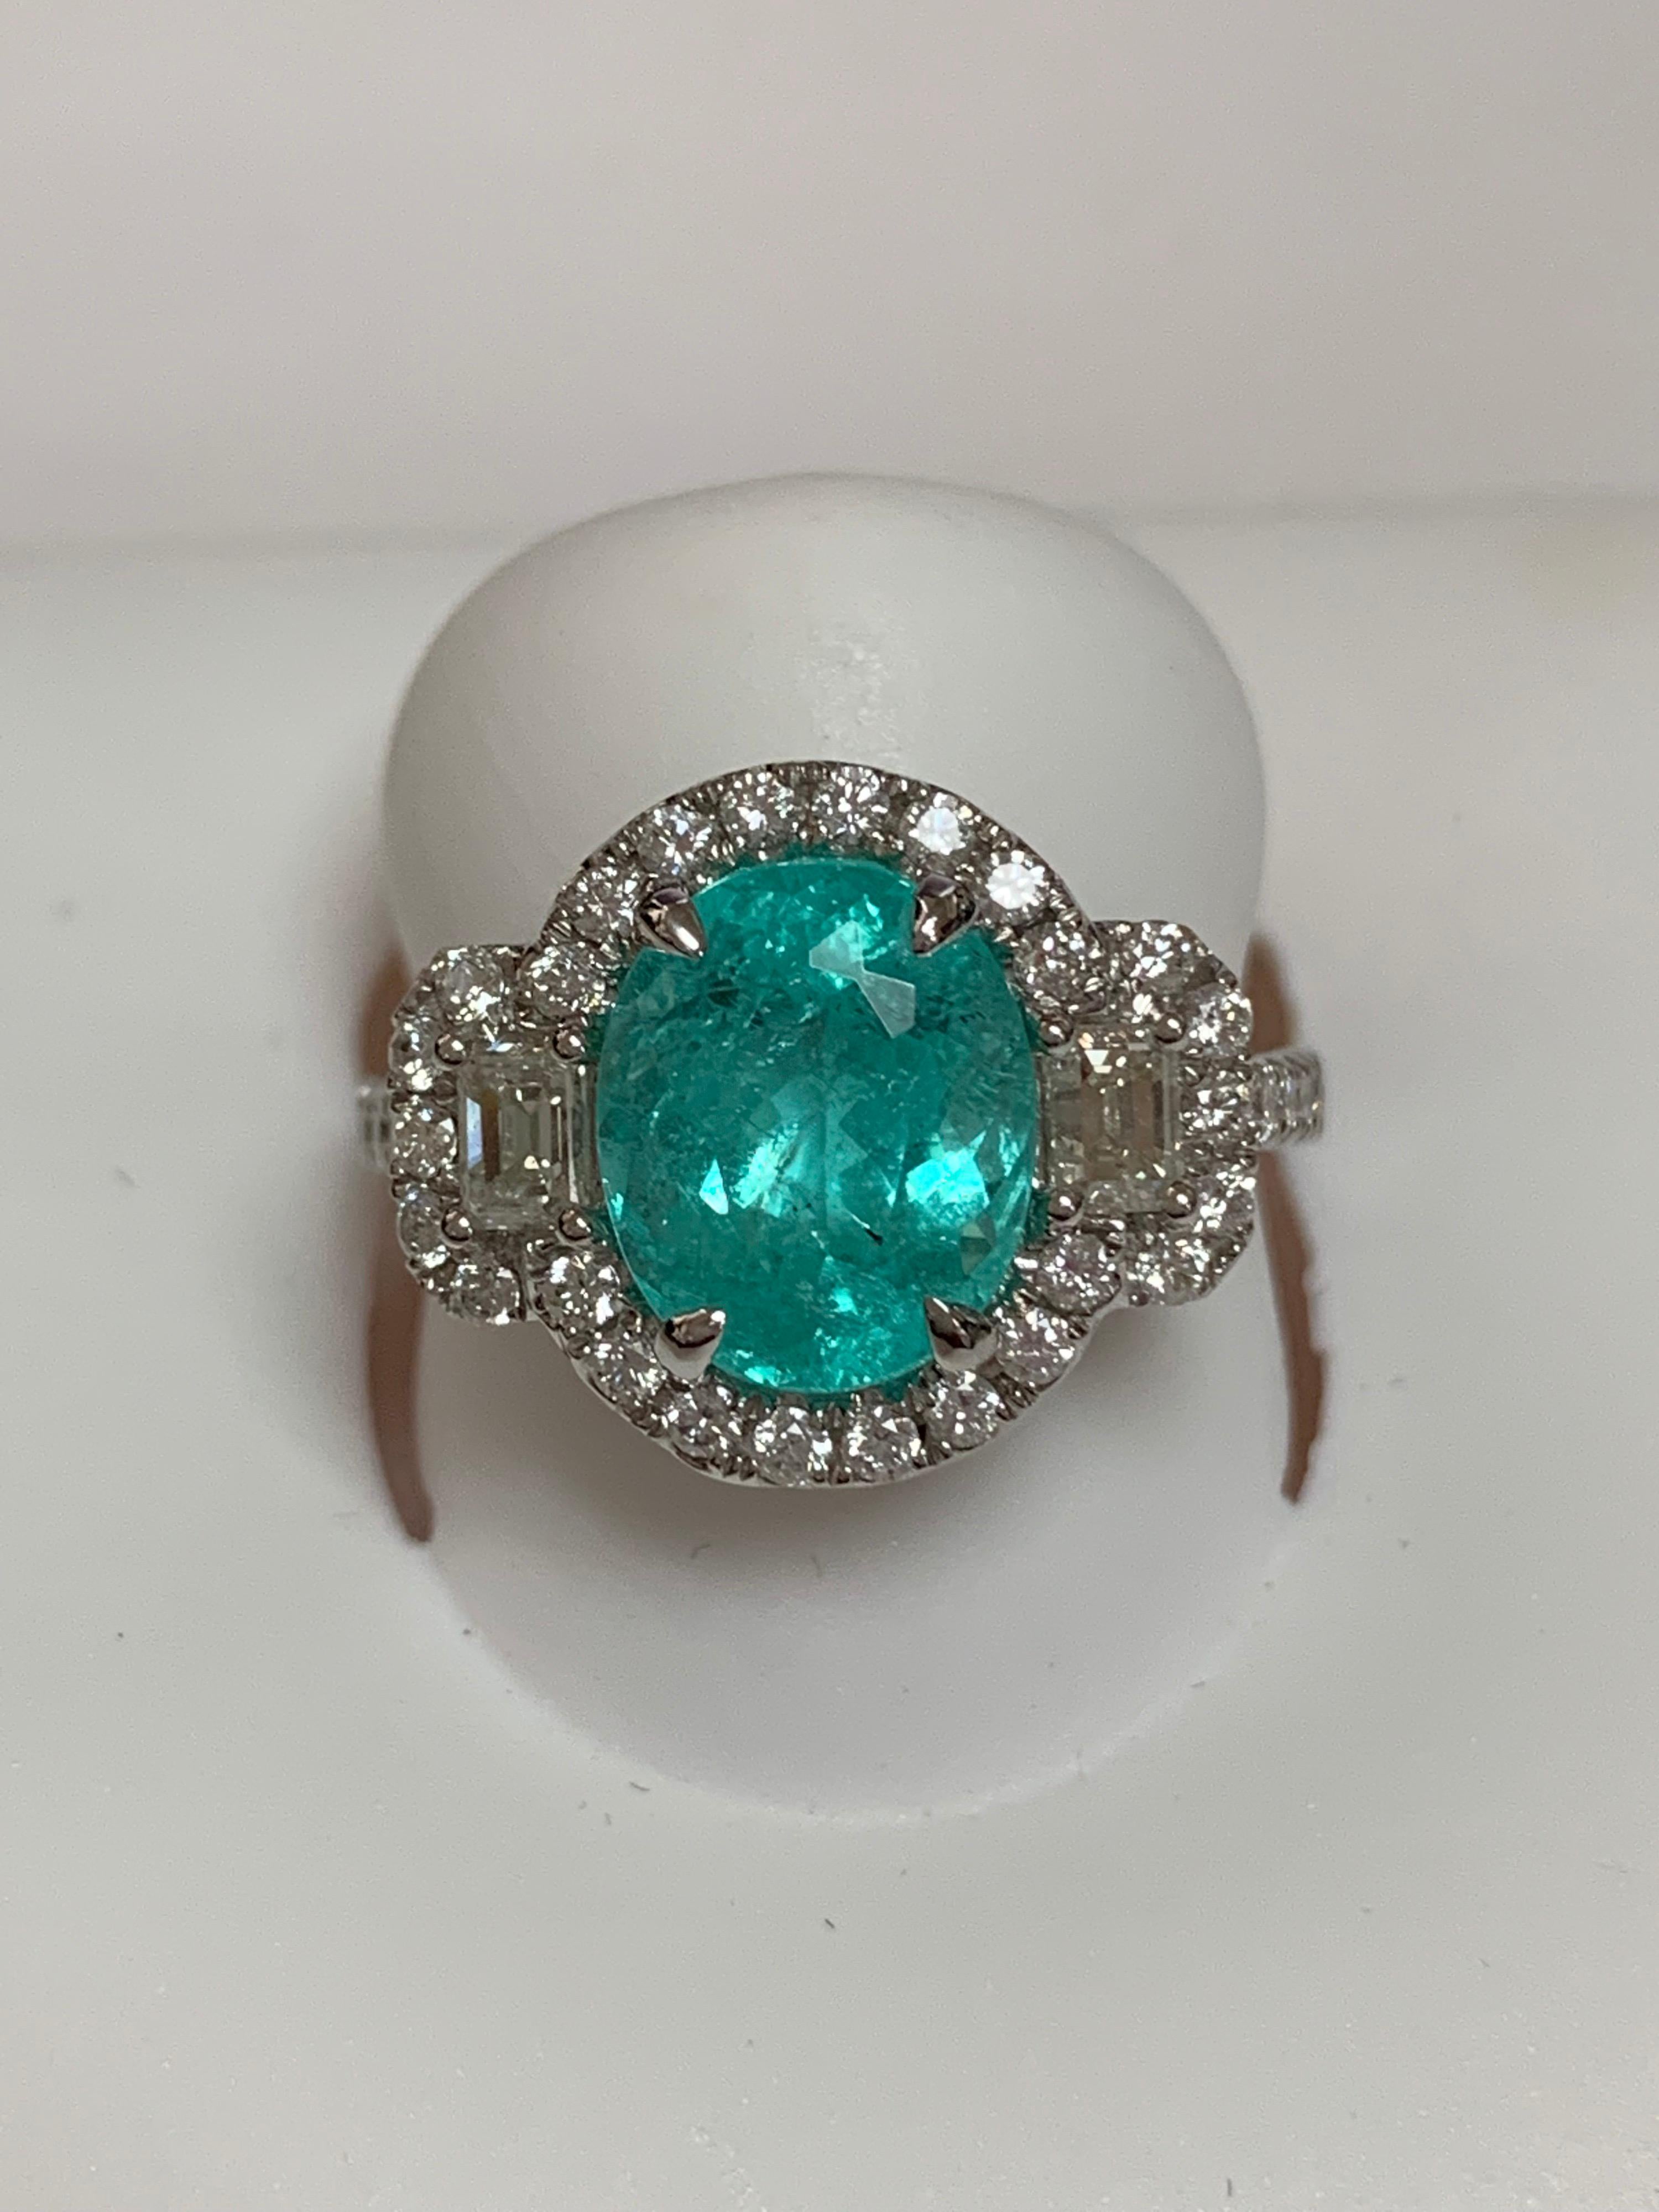 Natural copper bearing Tourmaline also known as Paraiba Tourmalineis 2.95 Carat  with additional 0.86 Carat White diamonds set in 18 Karat white gold is one of a kind handcrafted Ring. The ring is size 7 but can be resized if needed.